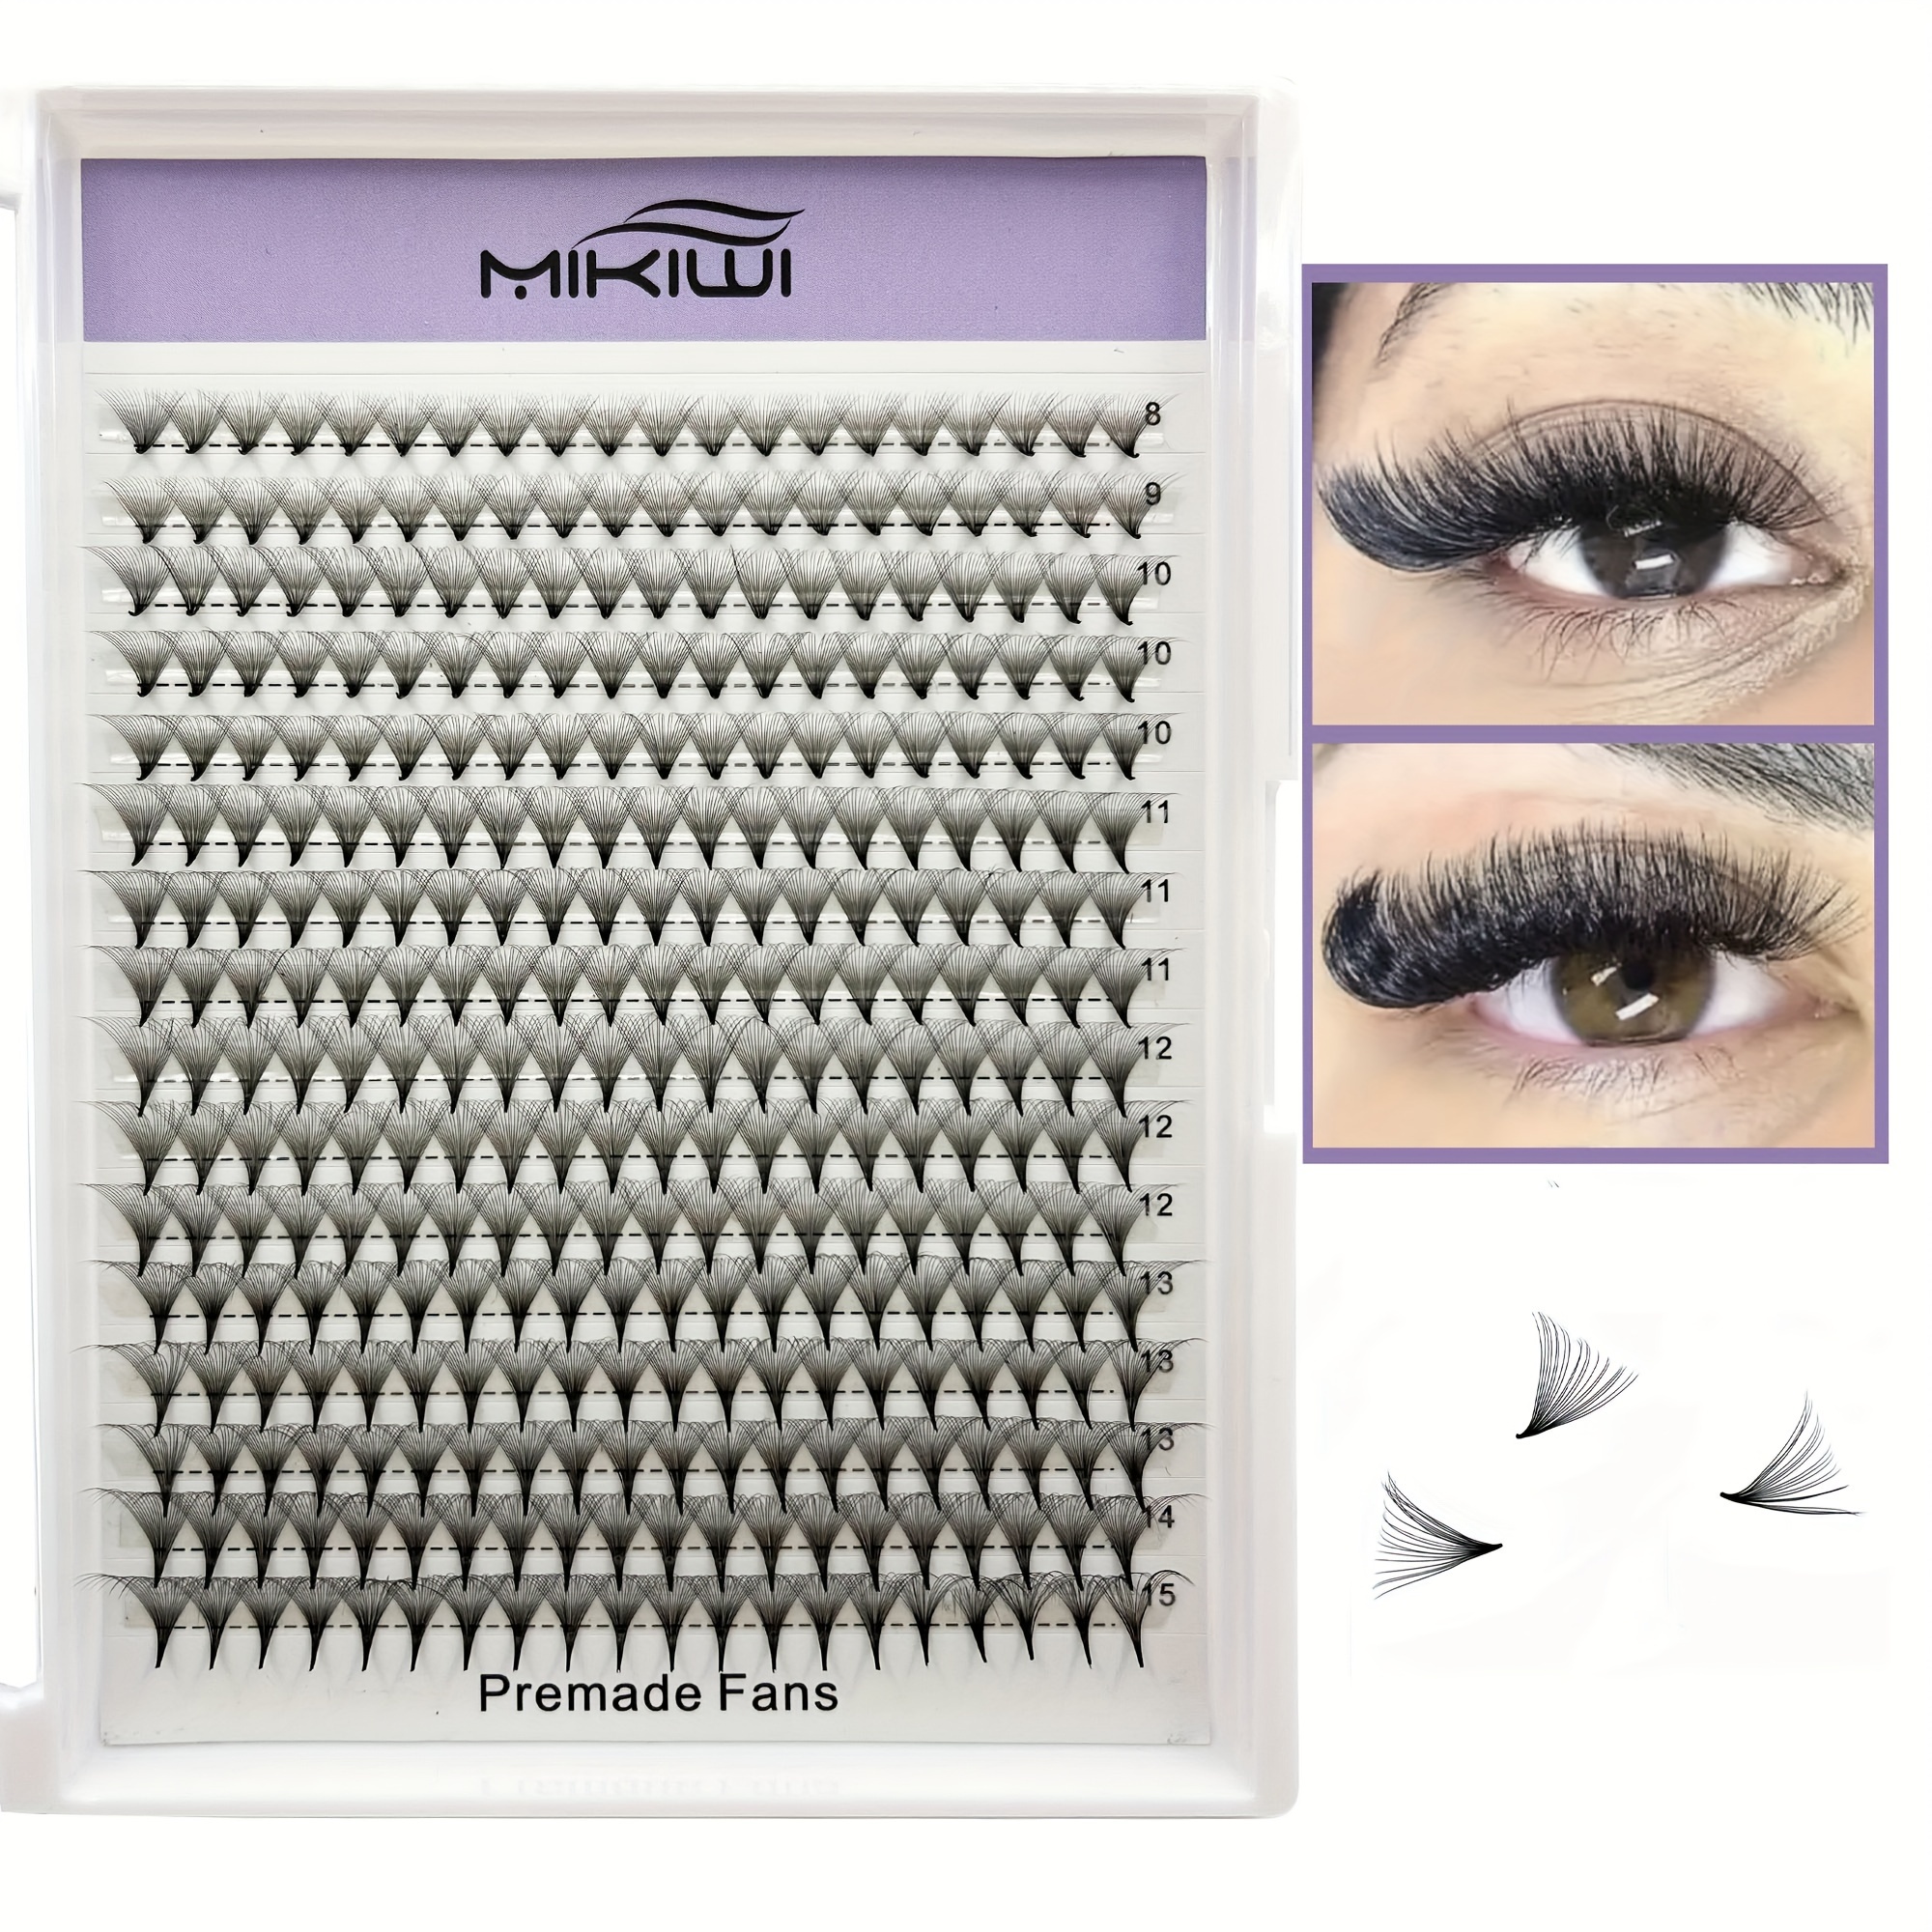 

320pcs Premade Fan Eyelash Extensions 20d Thickness 0.07 C/d Curling 8-15mm Eyelashes Middle Stem And Long Stem Premade Fans Russian Strip Volume Lash Extensions